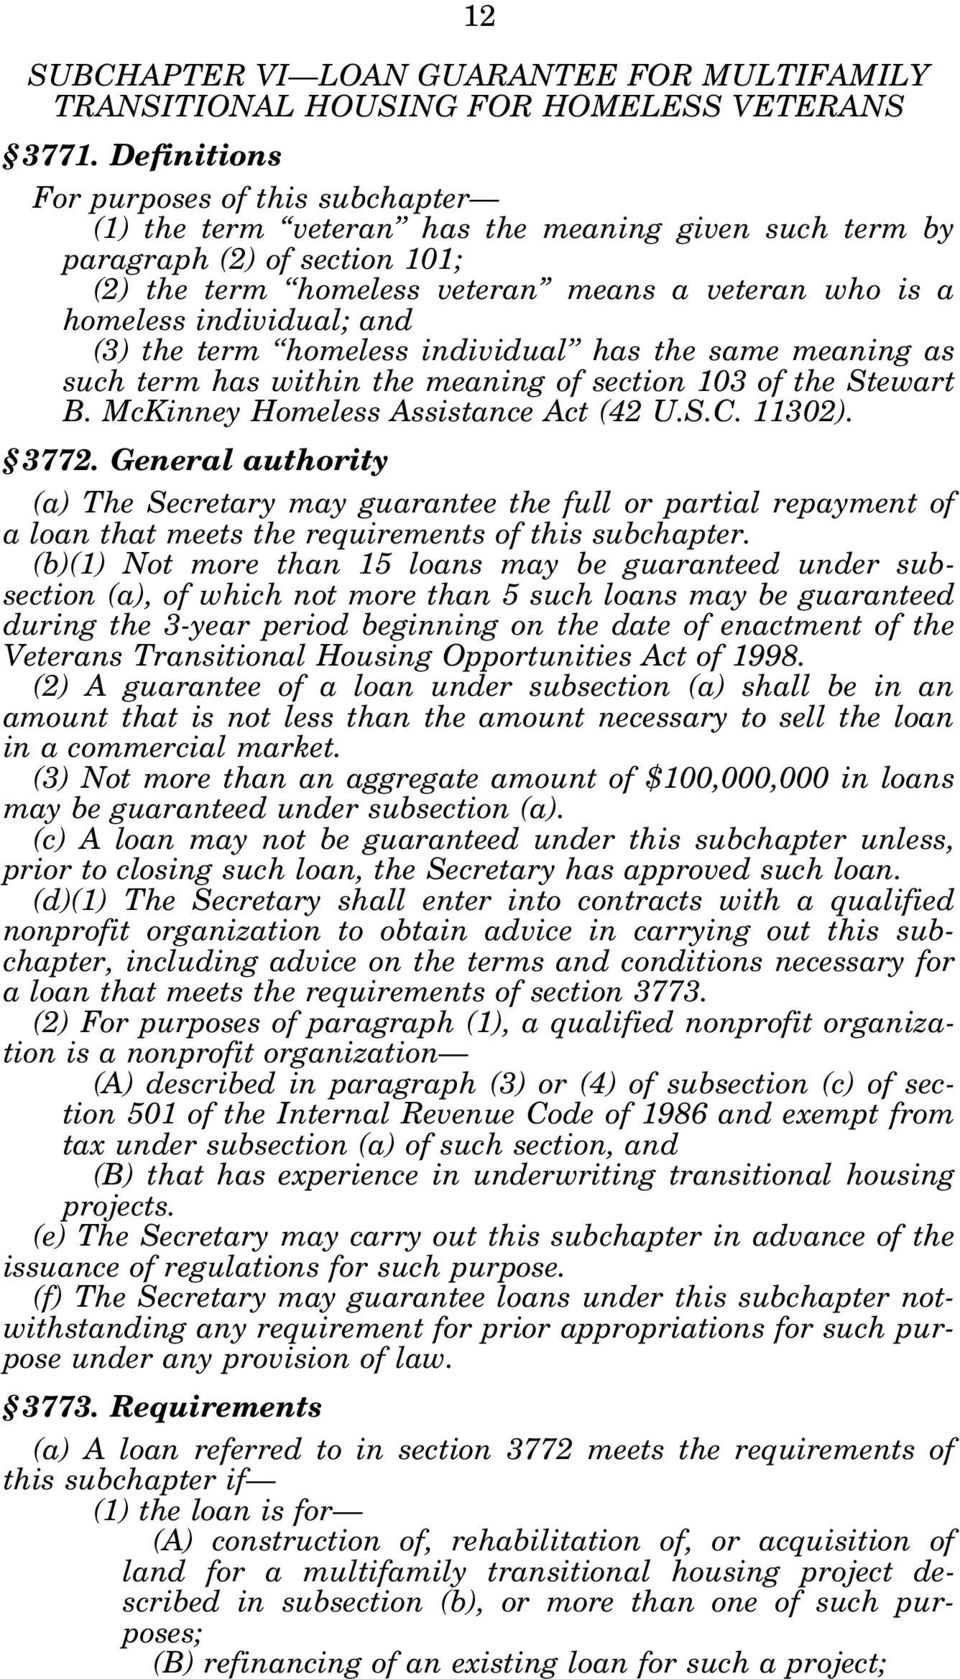 individual; and (3) the term homeless individual has the same meaning as such term has within the meaning of section 103 of the Stewart B. McKinney Homeless Assistance Act (42 U.S.C. 11302). 3772.